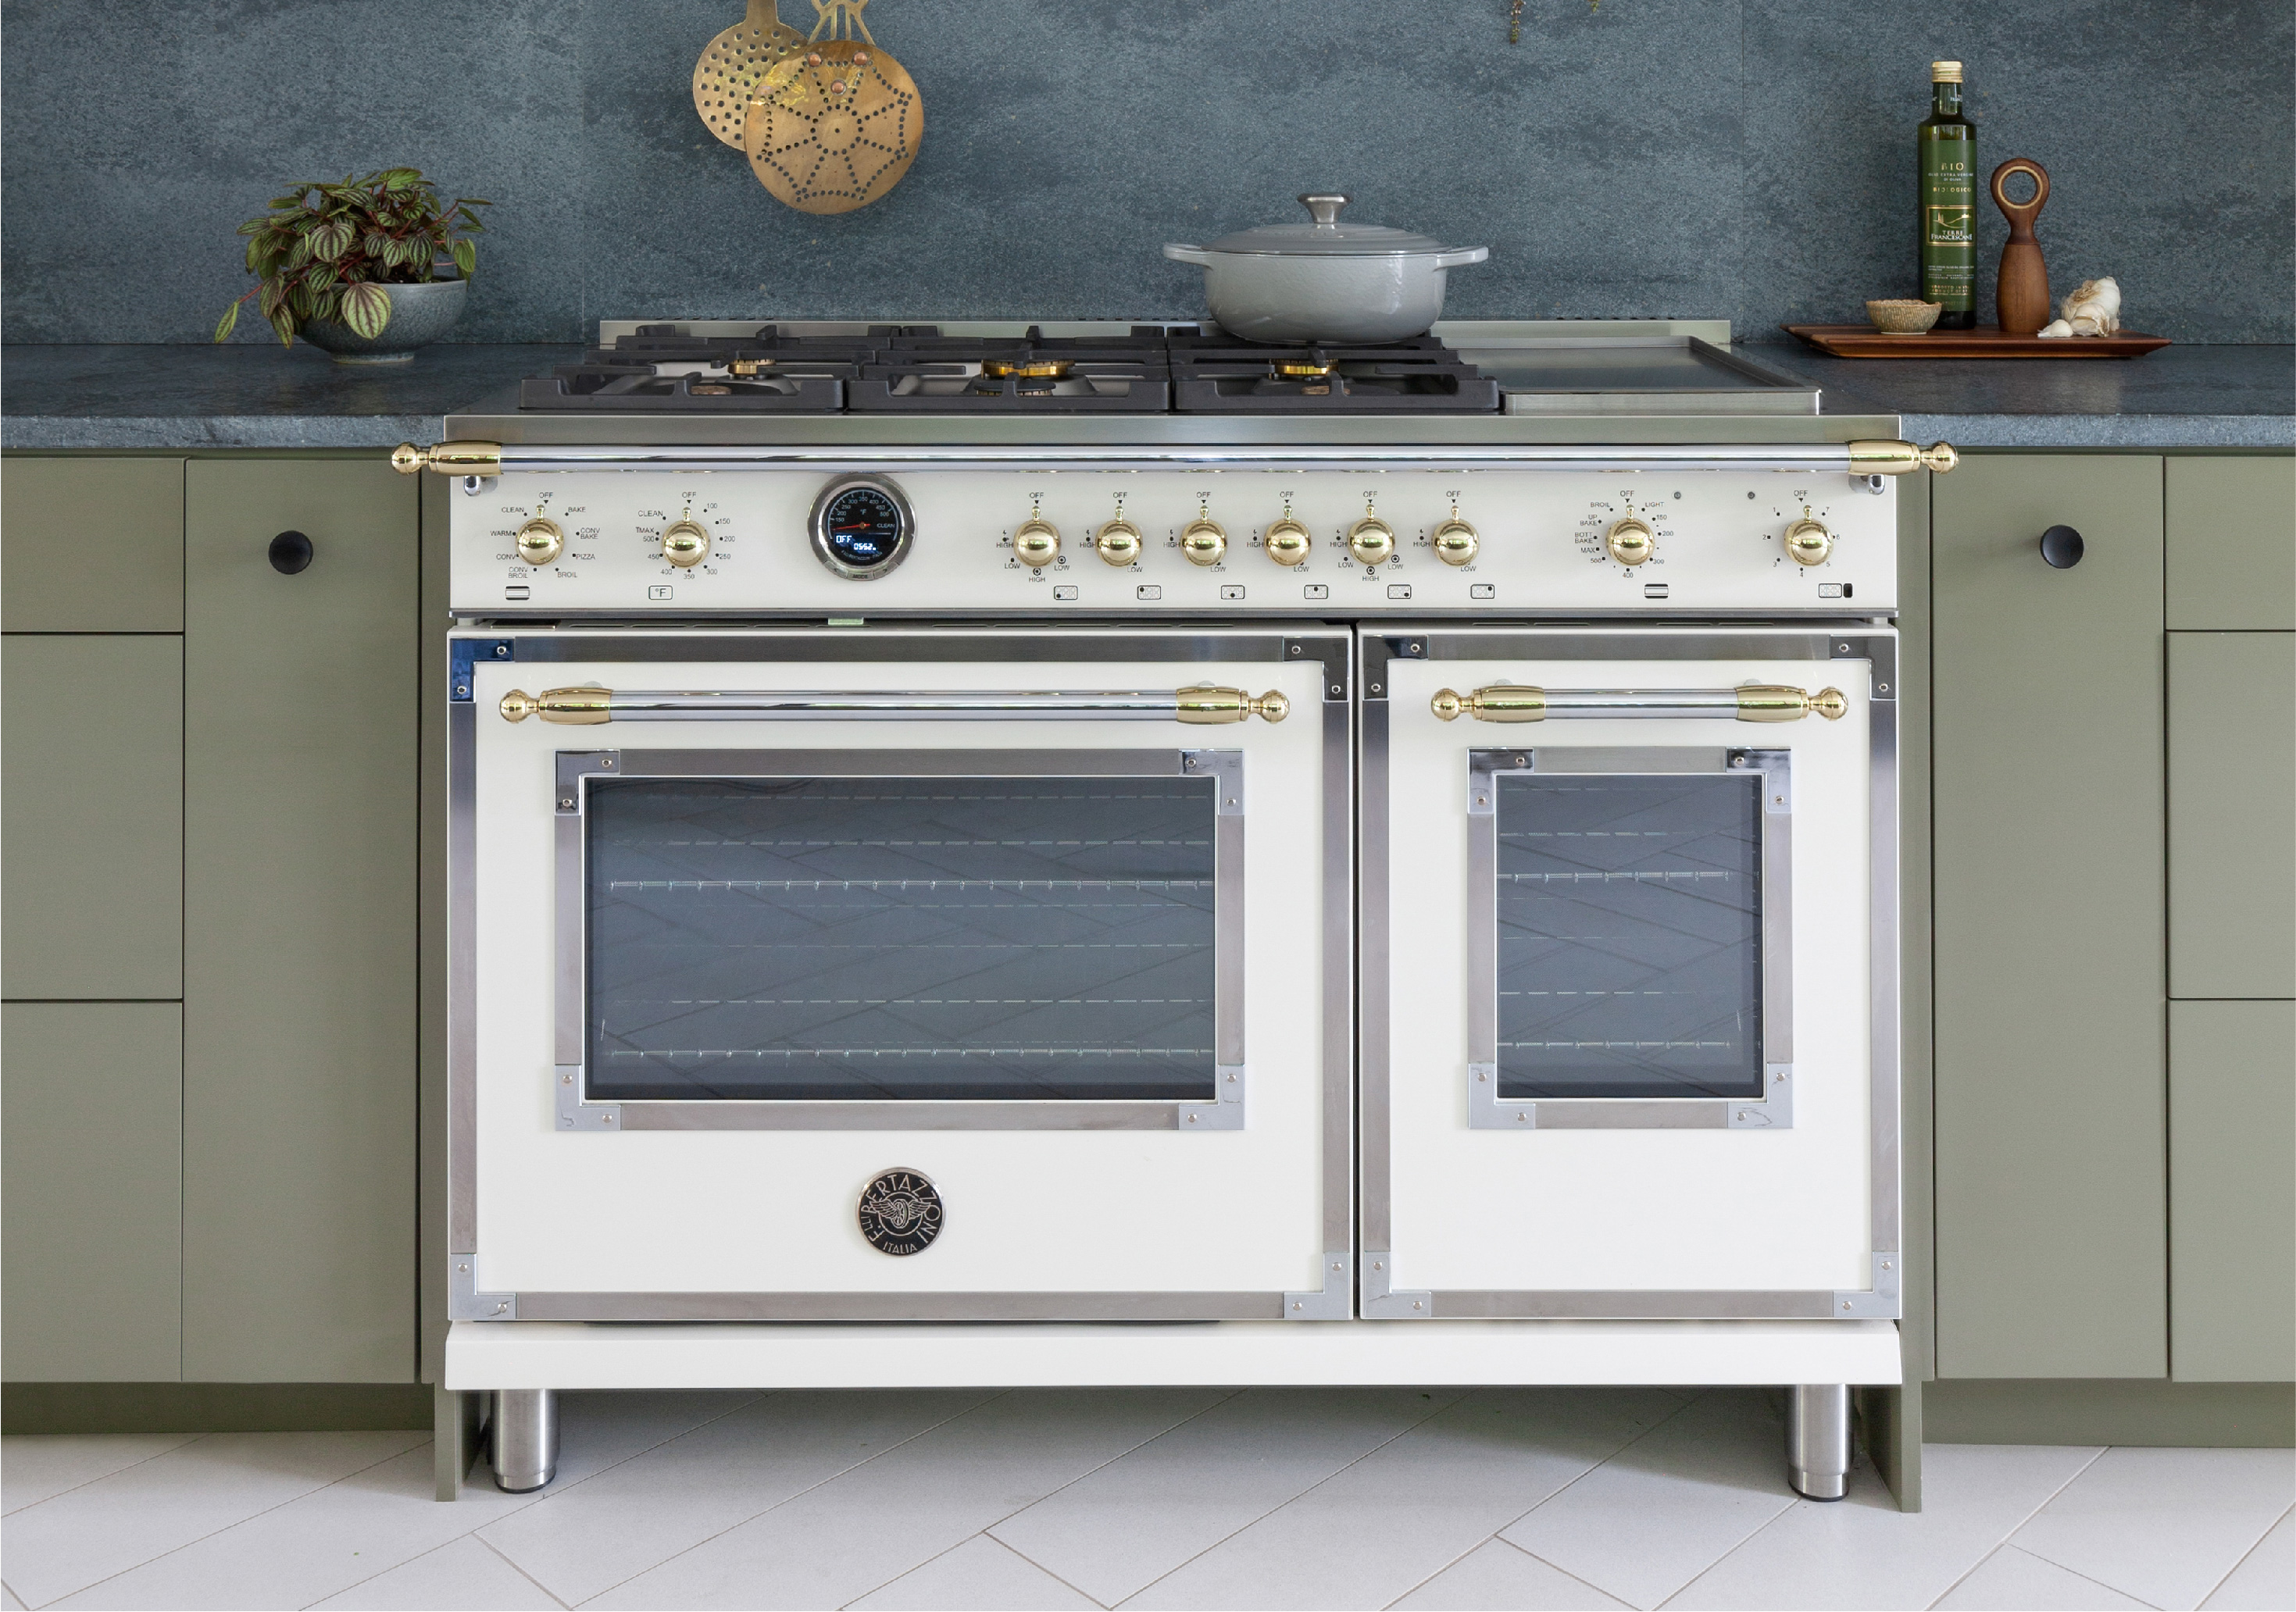 A touch of tradition with the Bertazzoni Heritage Series Range